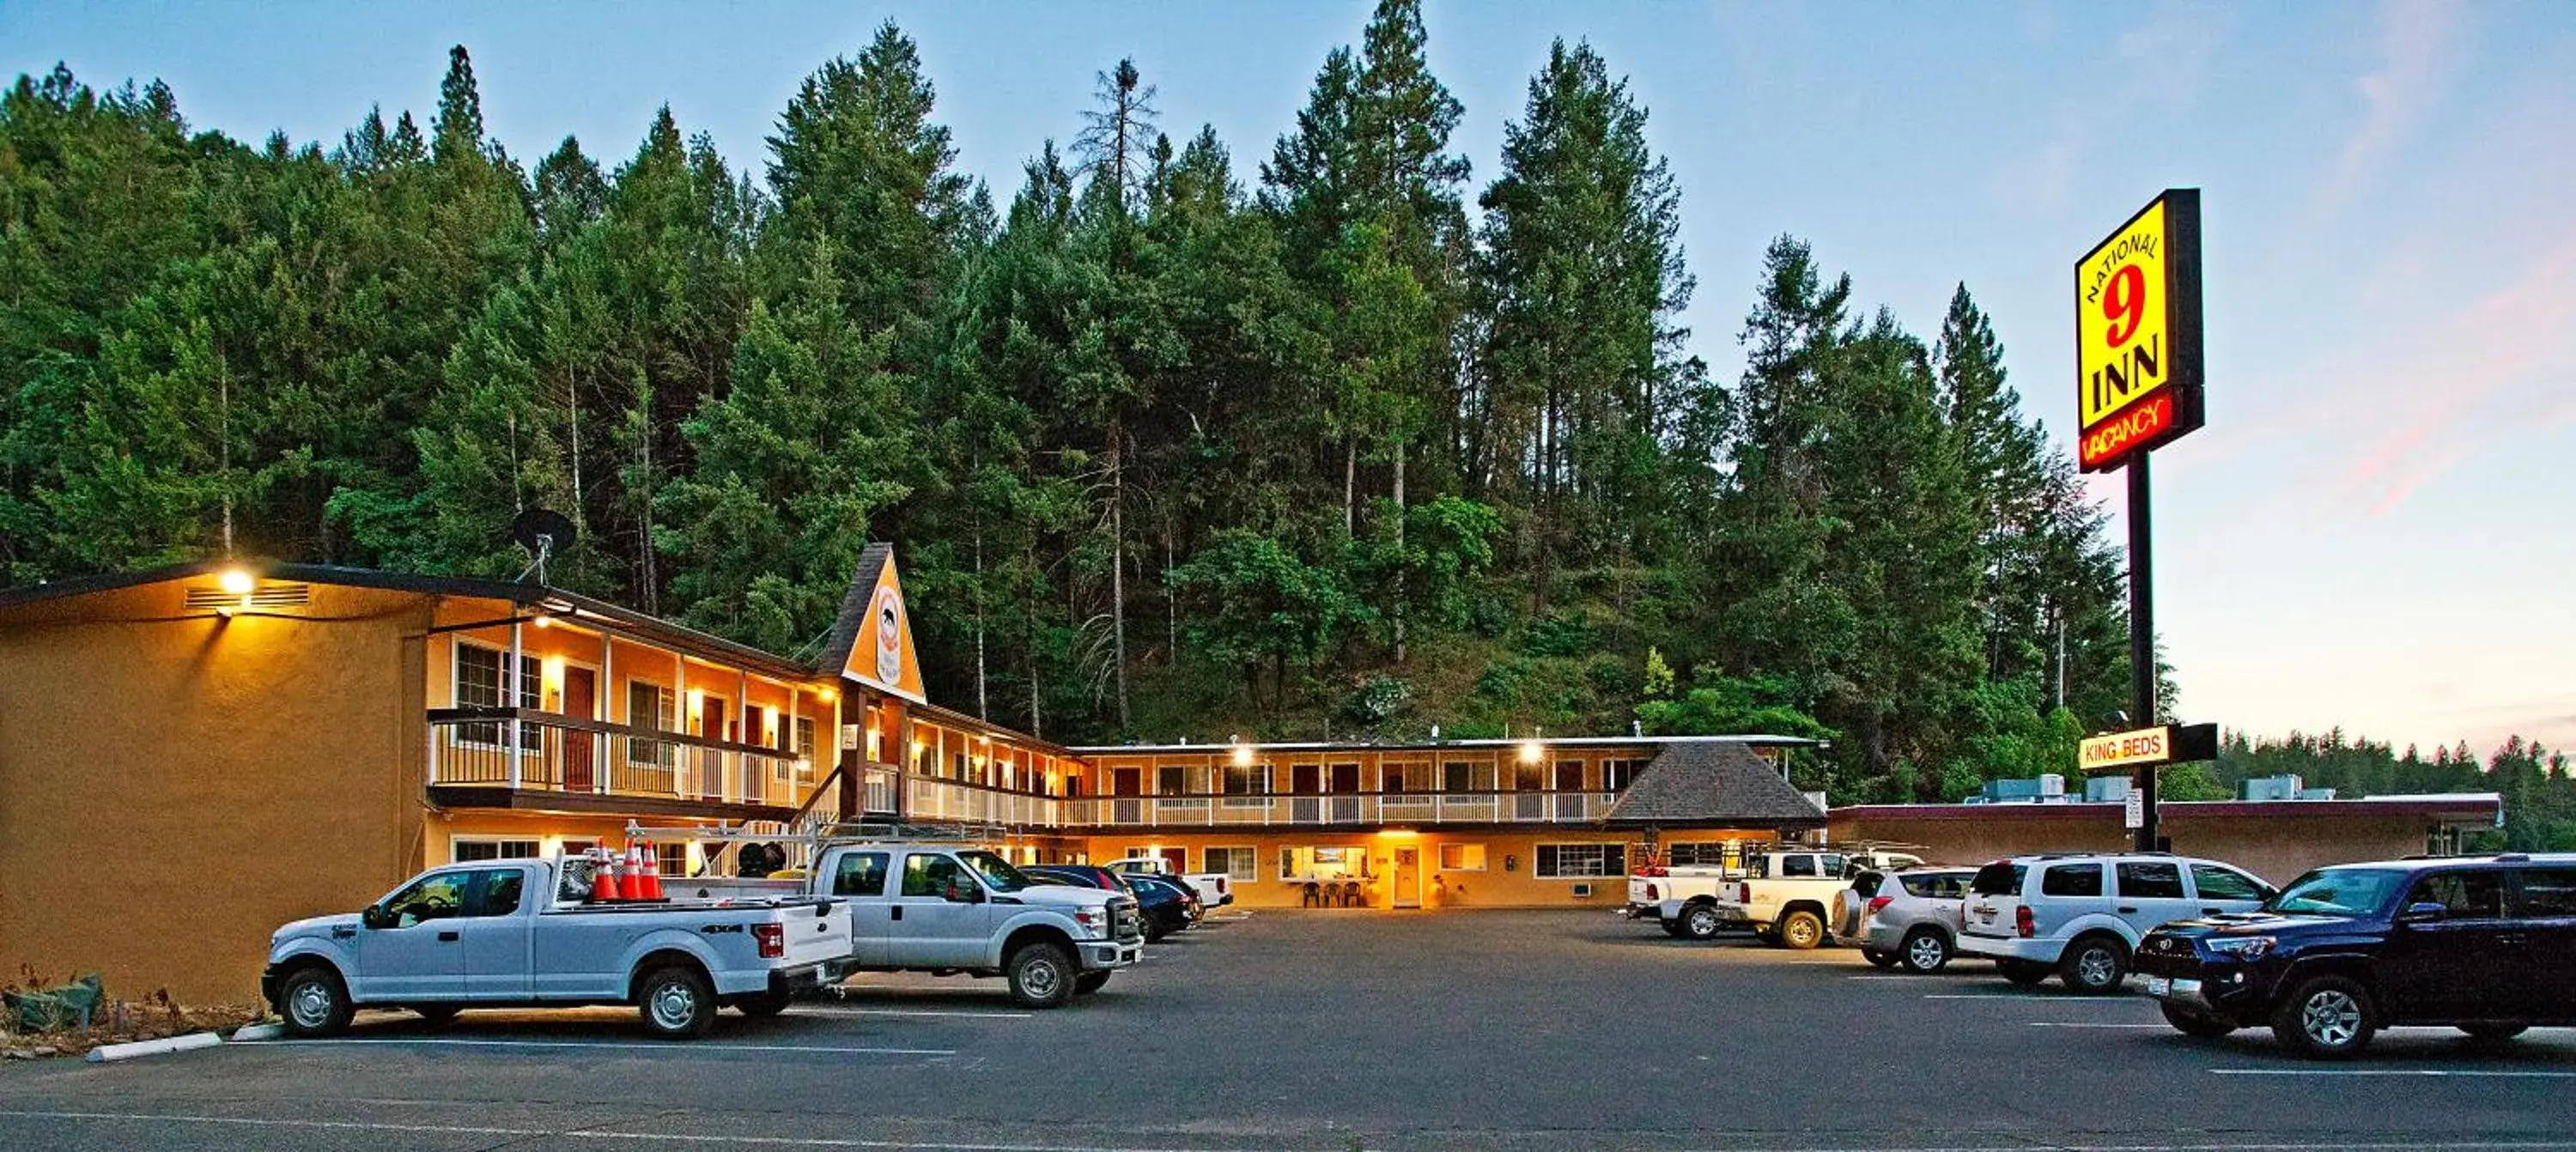 Property Building in National 9 Inn - Placerville